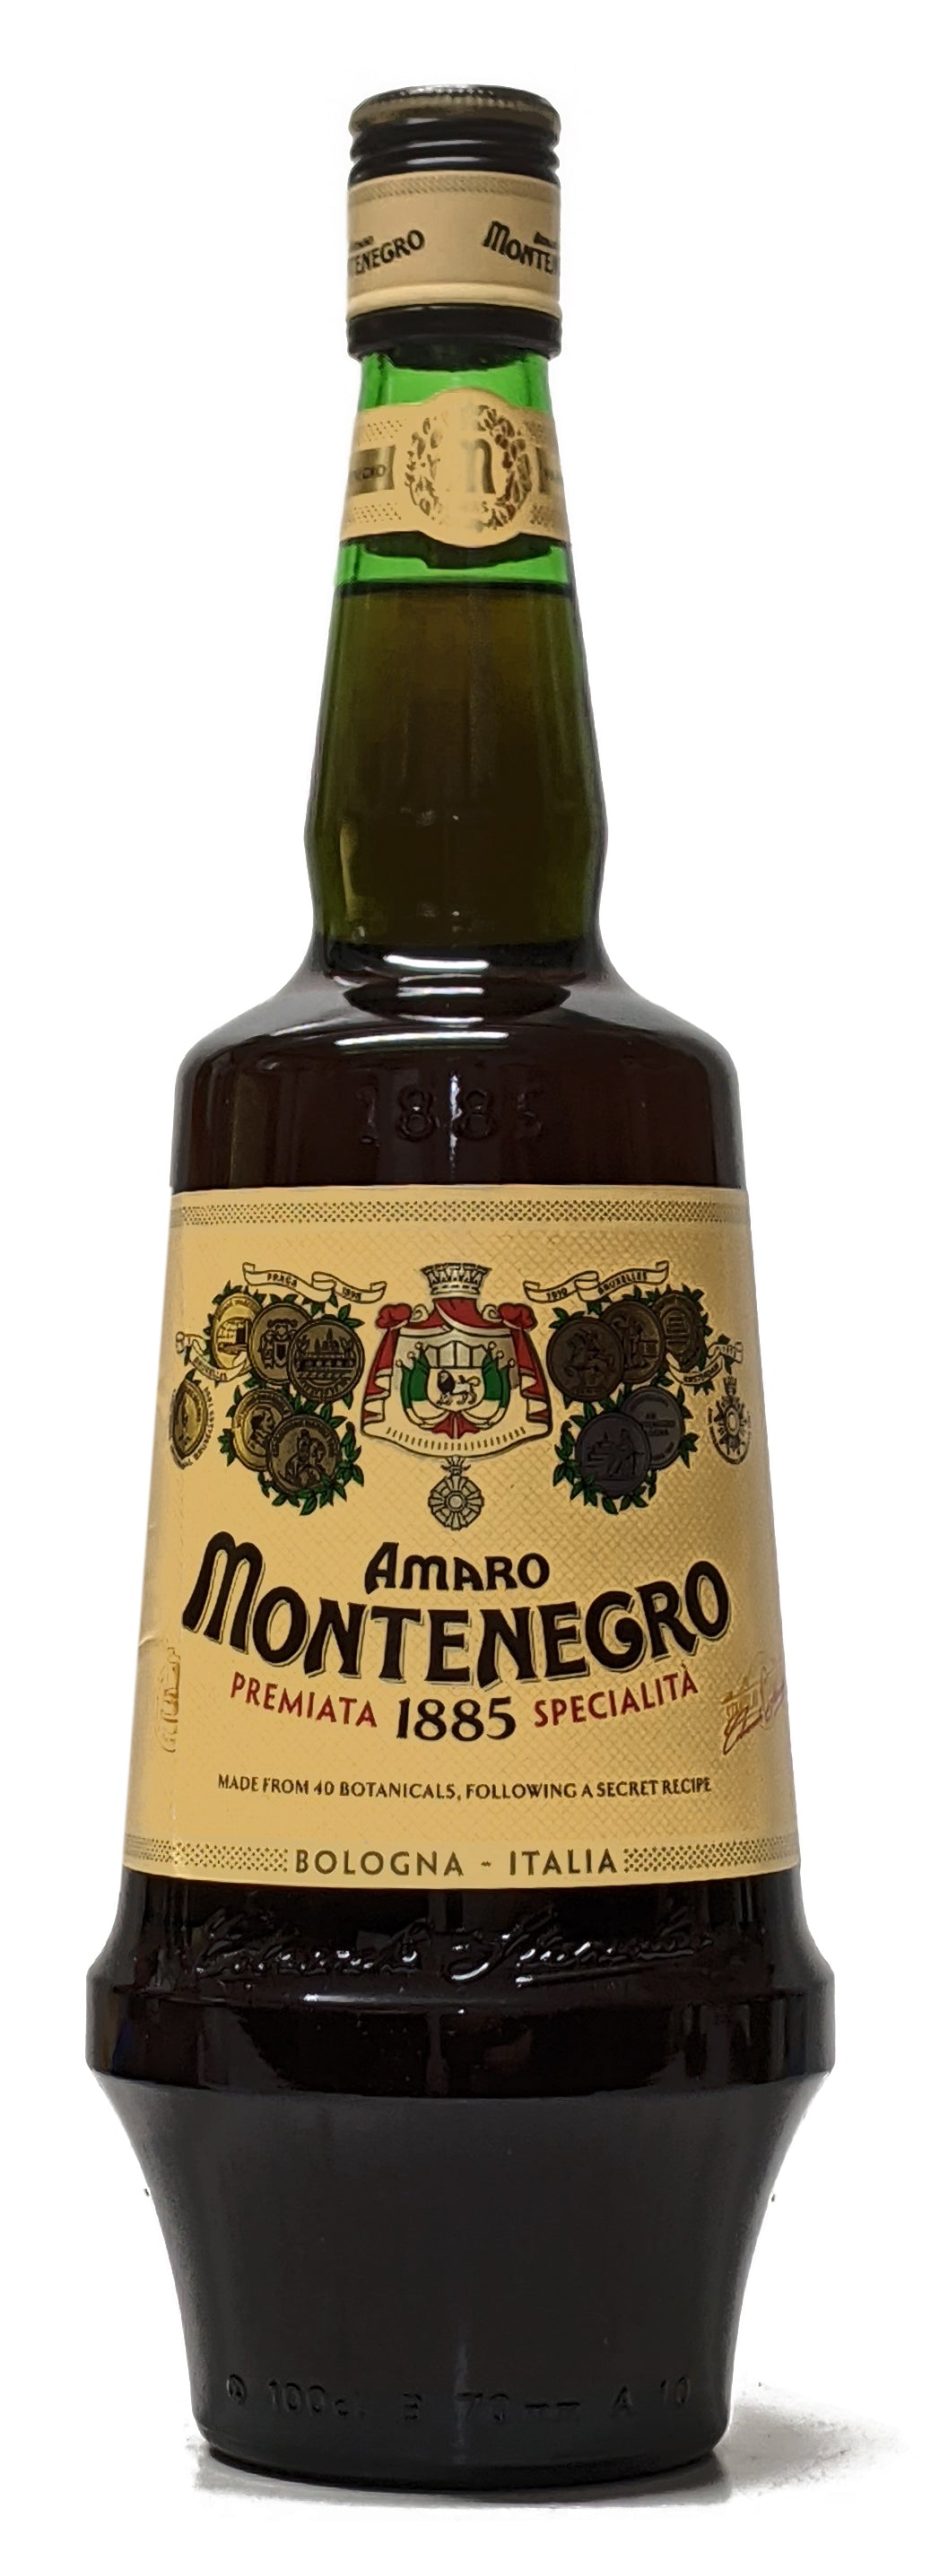 The Amaro Montenegro 1L Global Uniquesource website is the best place to  shop for the most extensive variety of products available online